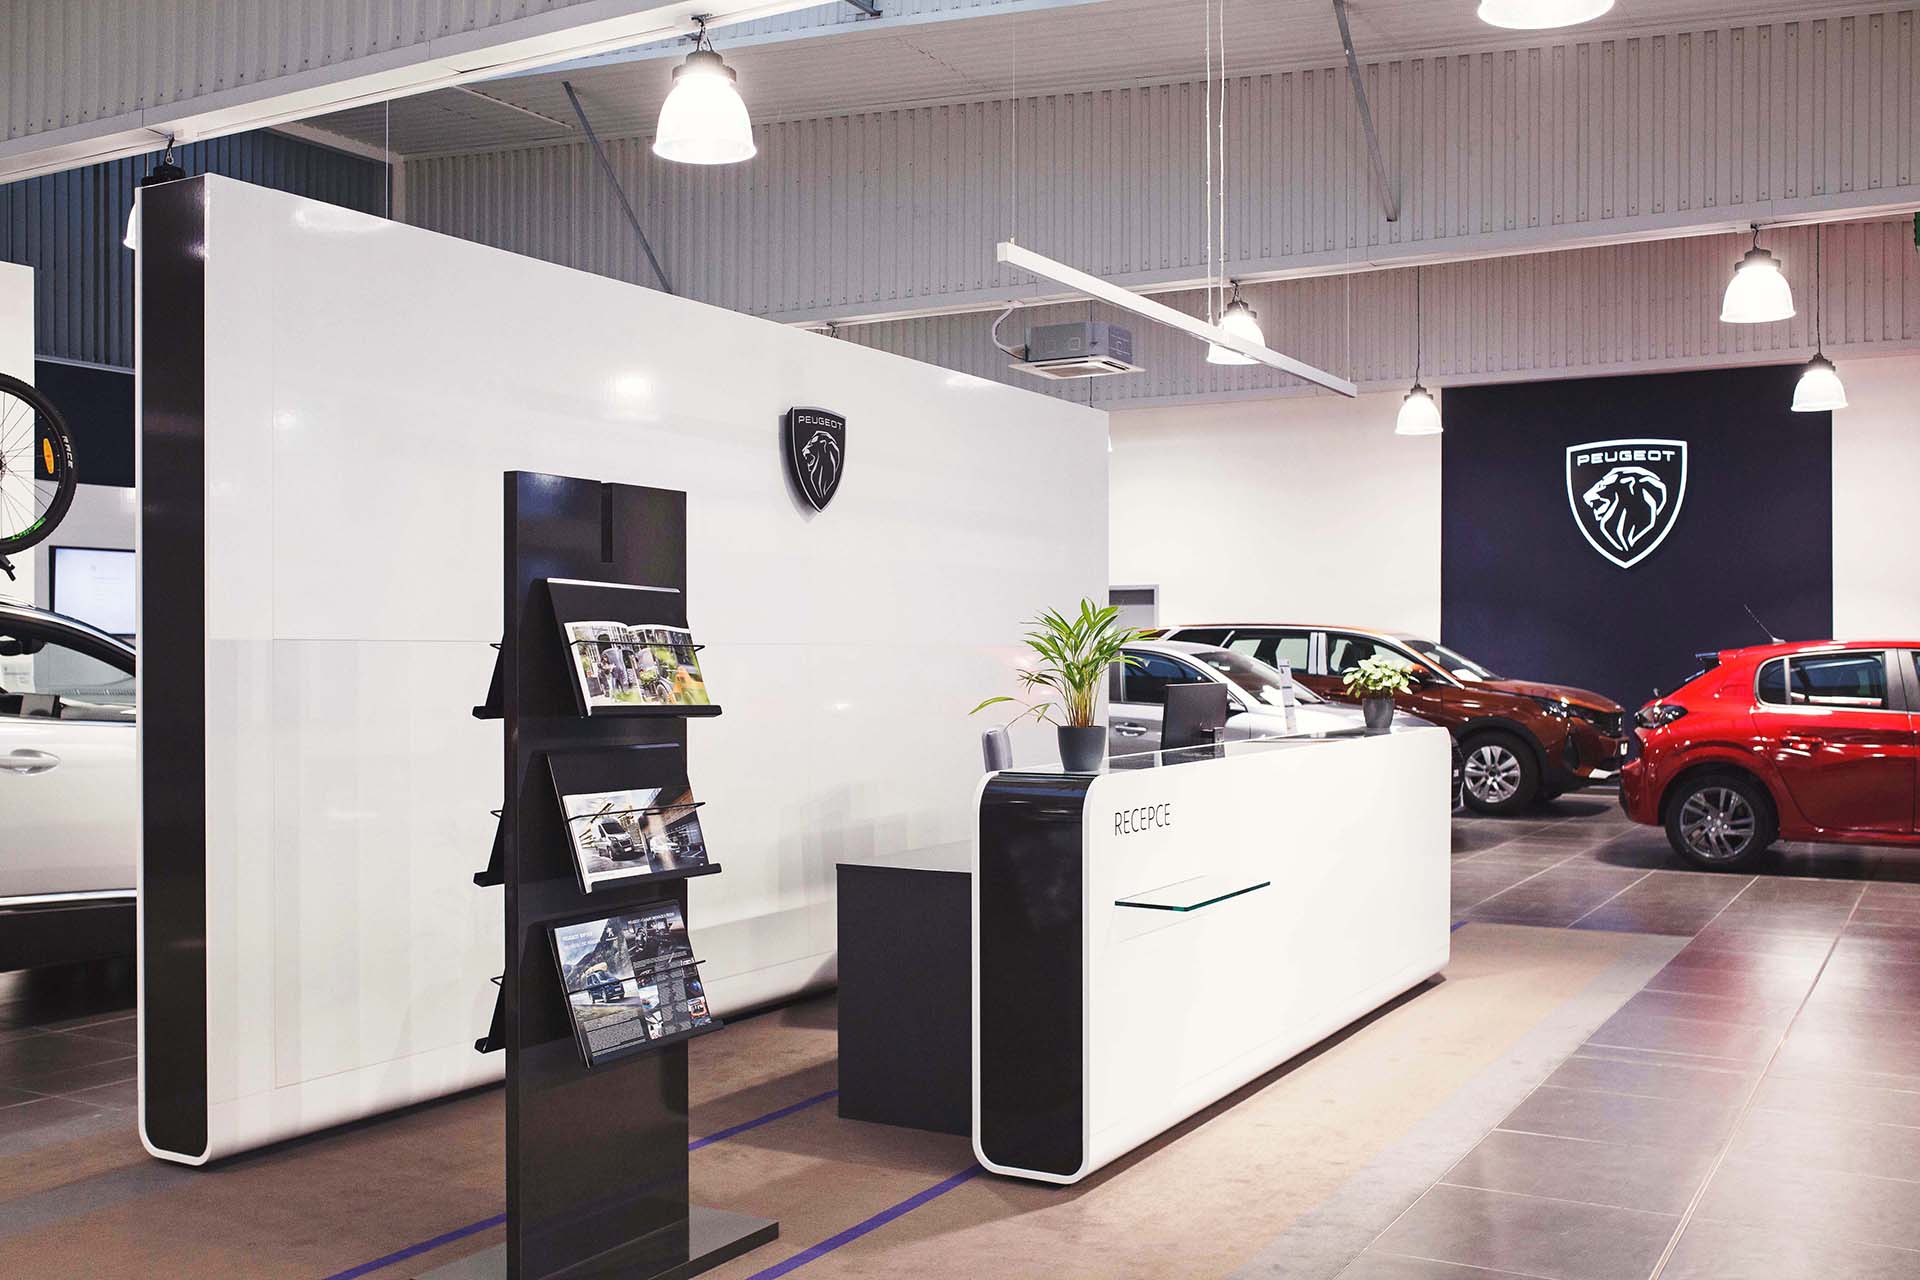 Peugeot showrooms and facilities